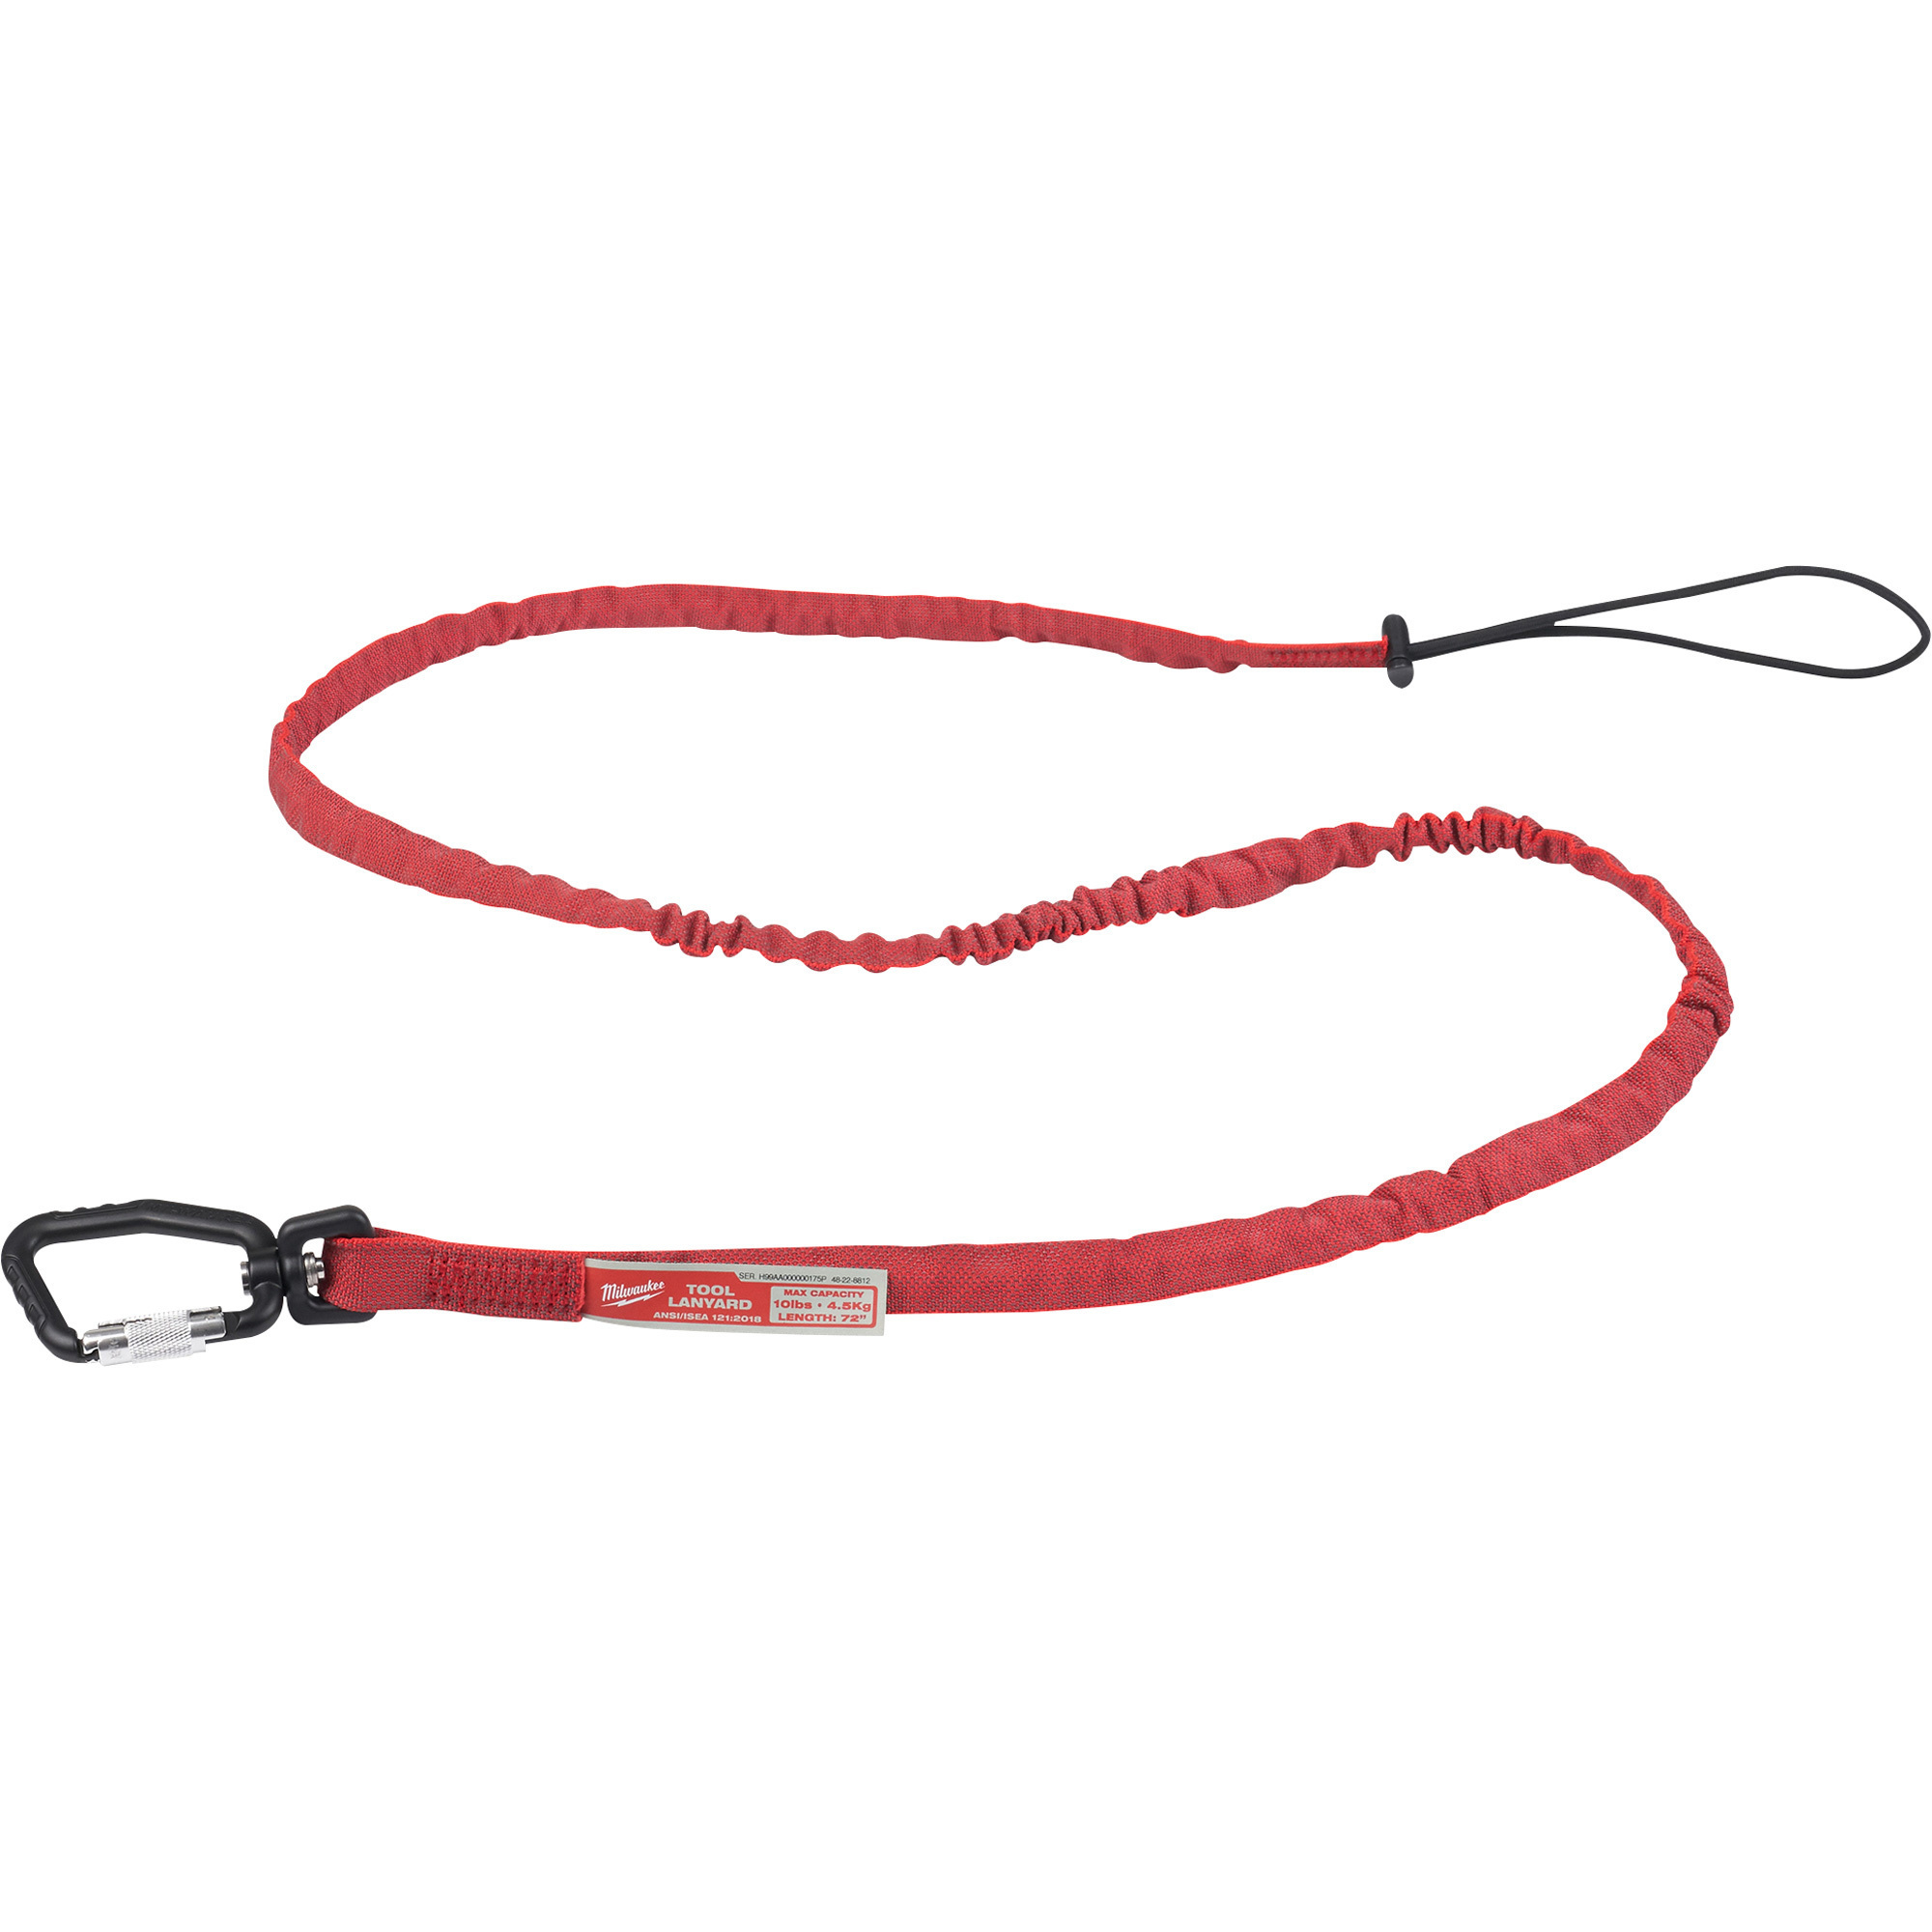 Milwaukee 72Inch Extended Reach Locking Tool Lanyard, 10-Lb. Working Load, Model 48-22-8812